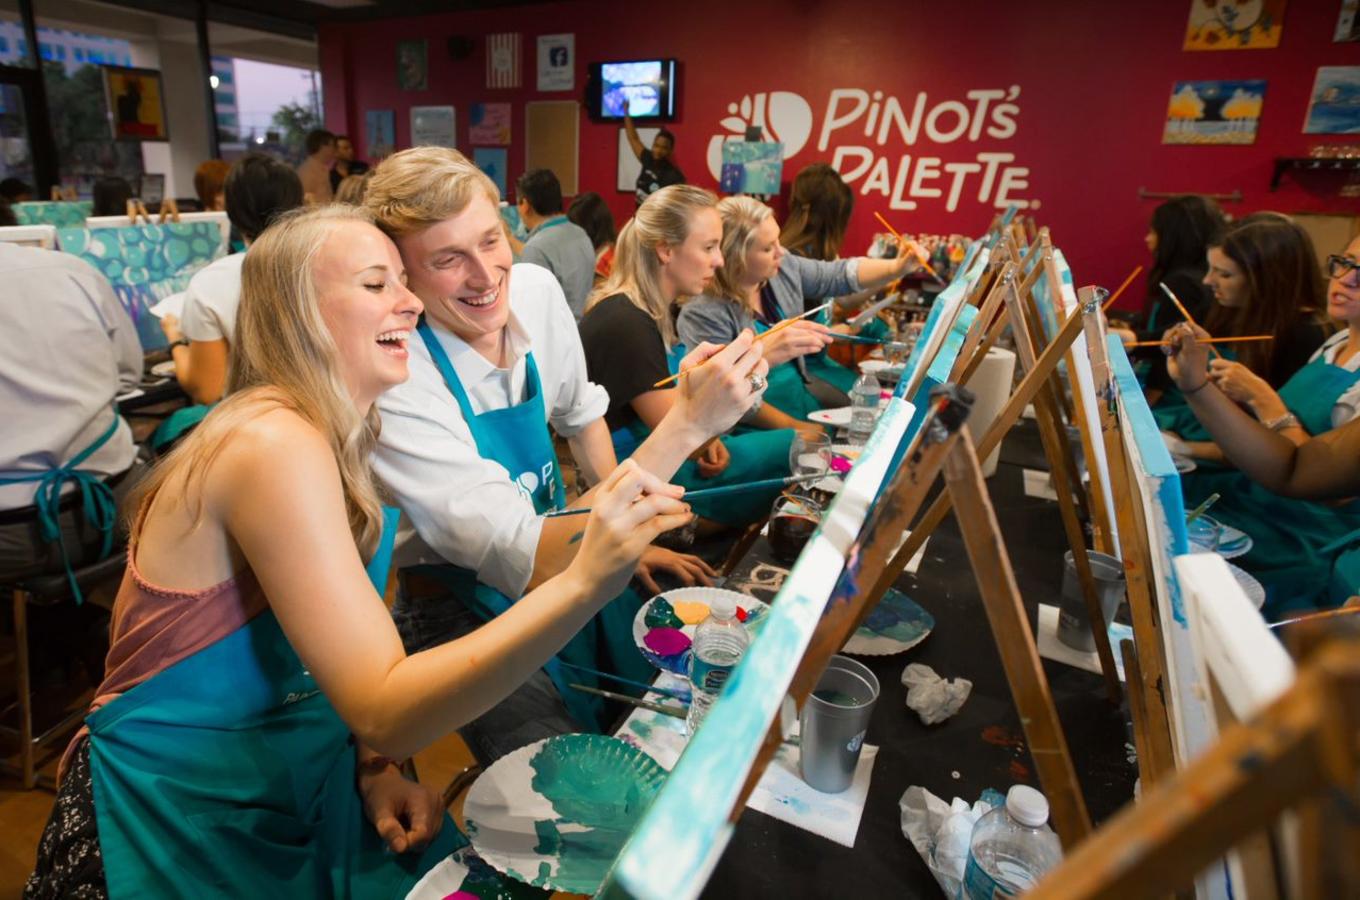 Enjoy This Special Discount On Our Classes! - Pinot's Palette